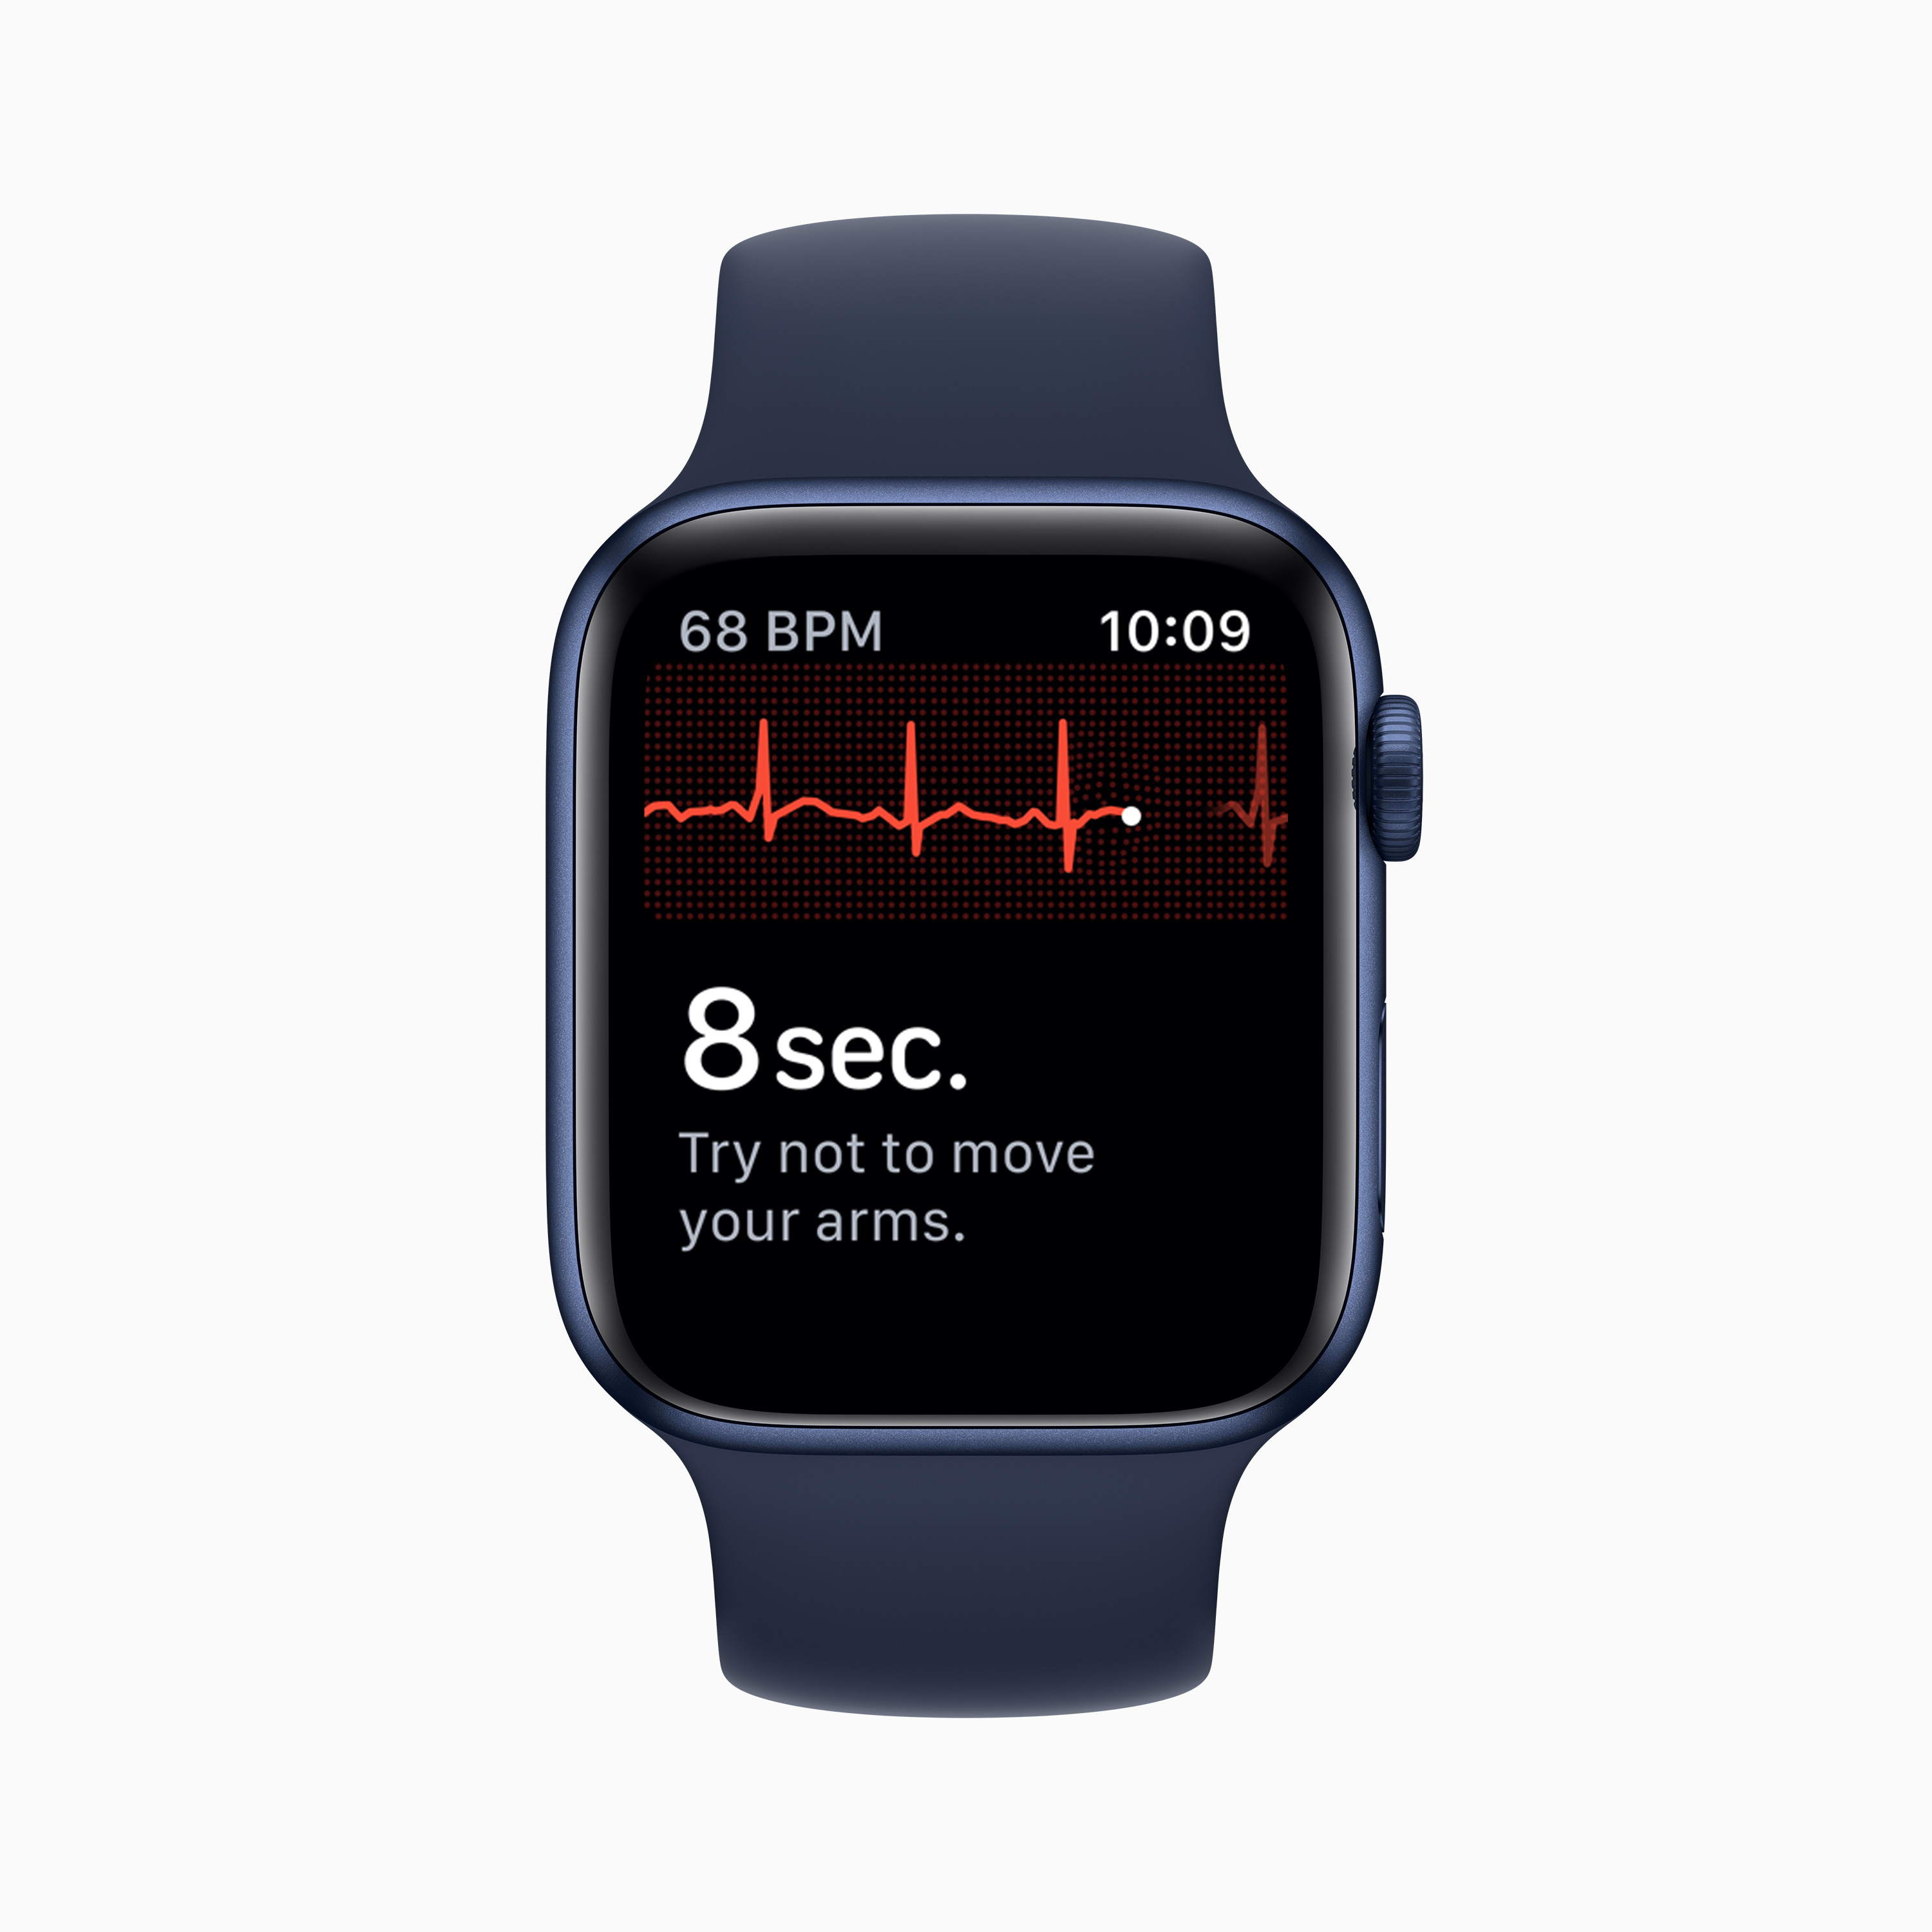 4 Apple Watch tips and tricks that could change your life (фото 3)